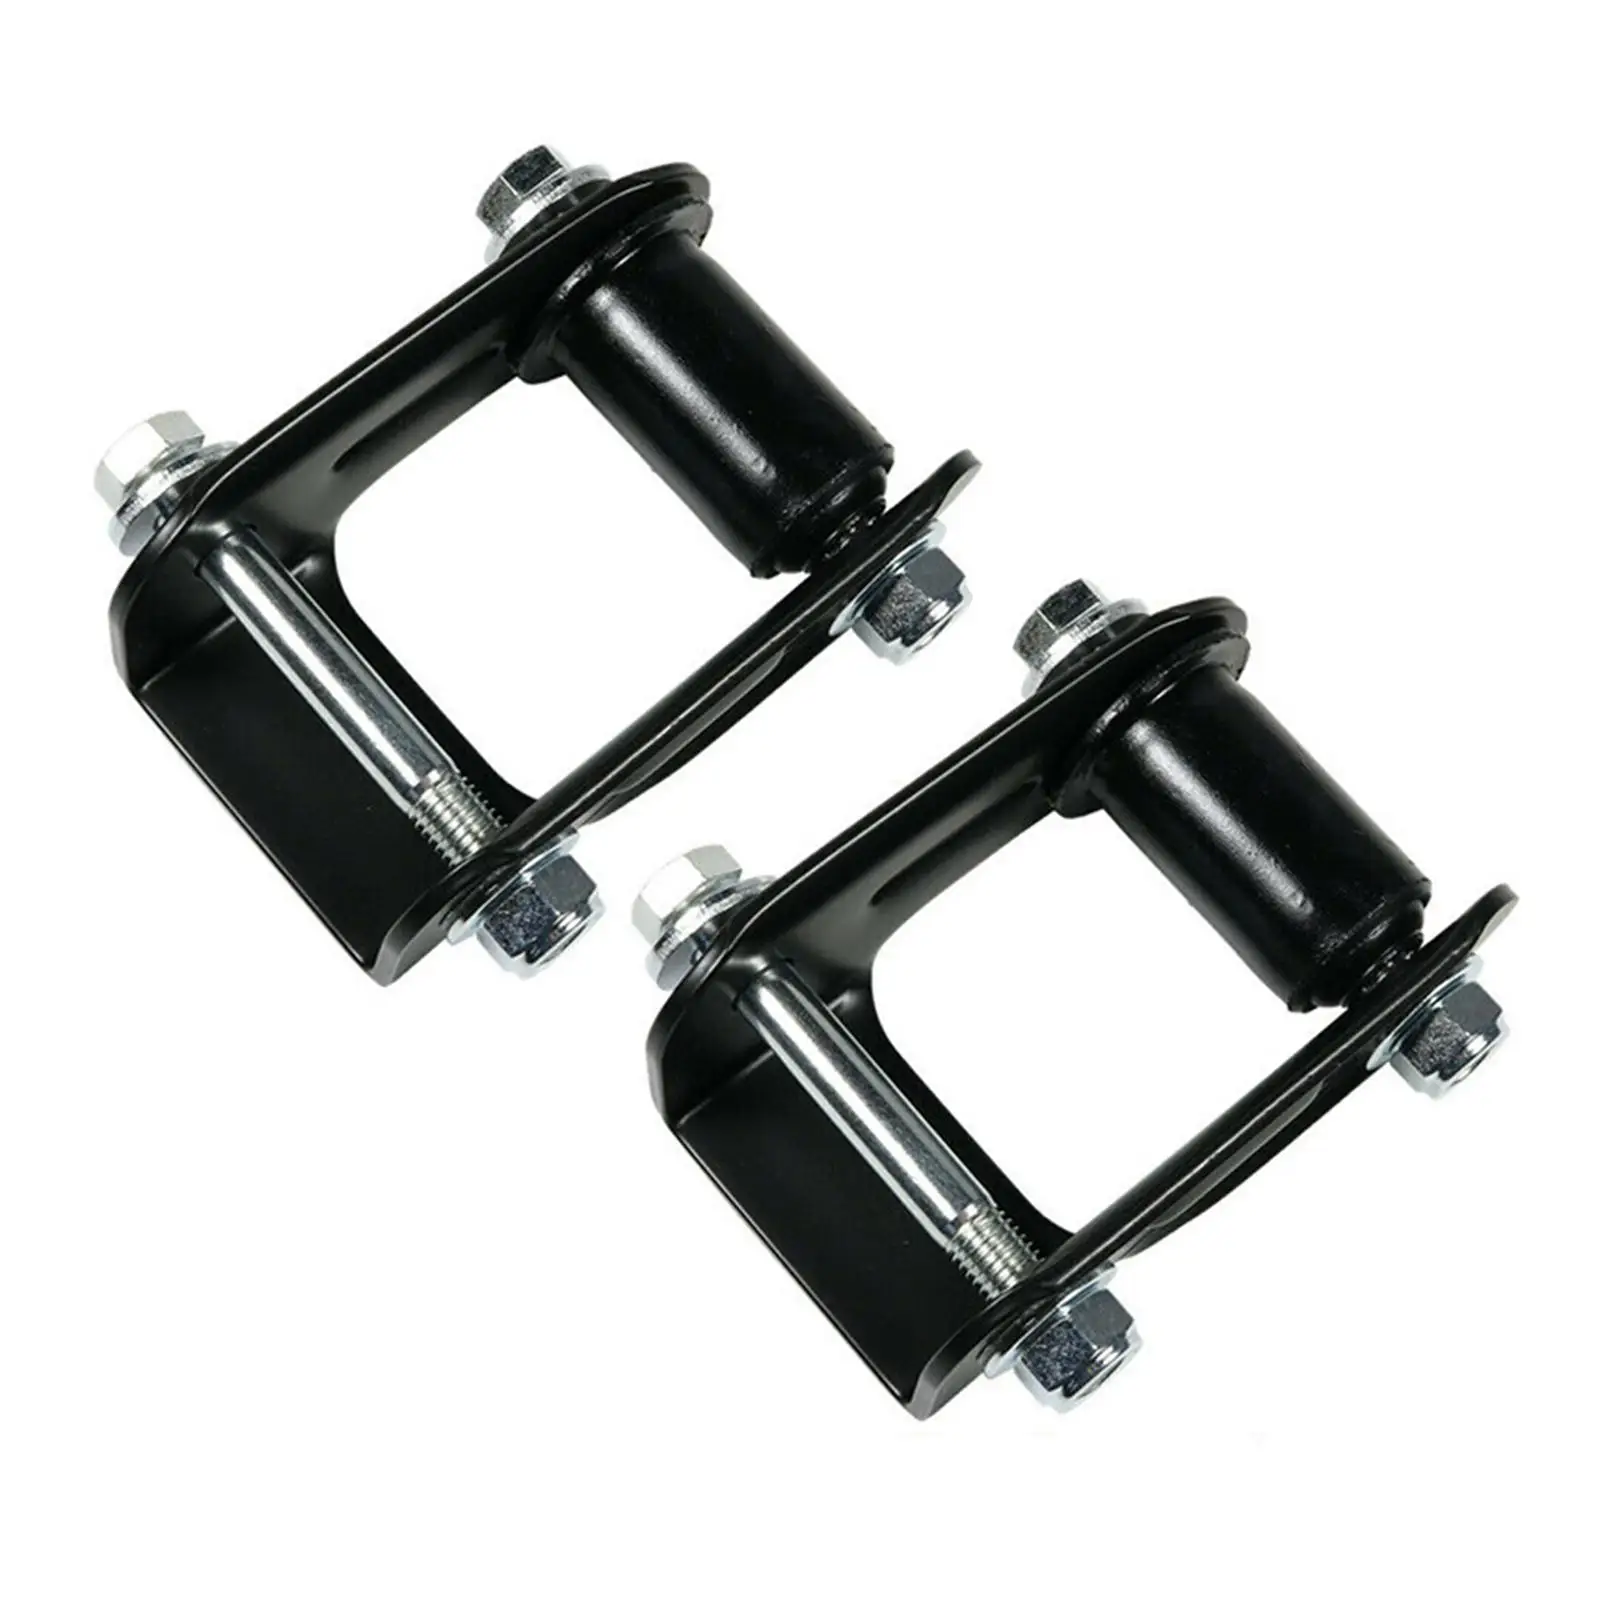 2x Rear Leaf Spring Shackle Kit Decorative Accessories for Chevrolet